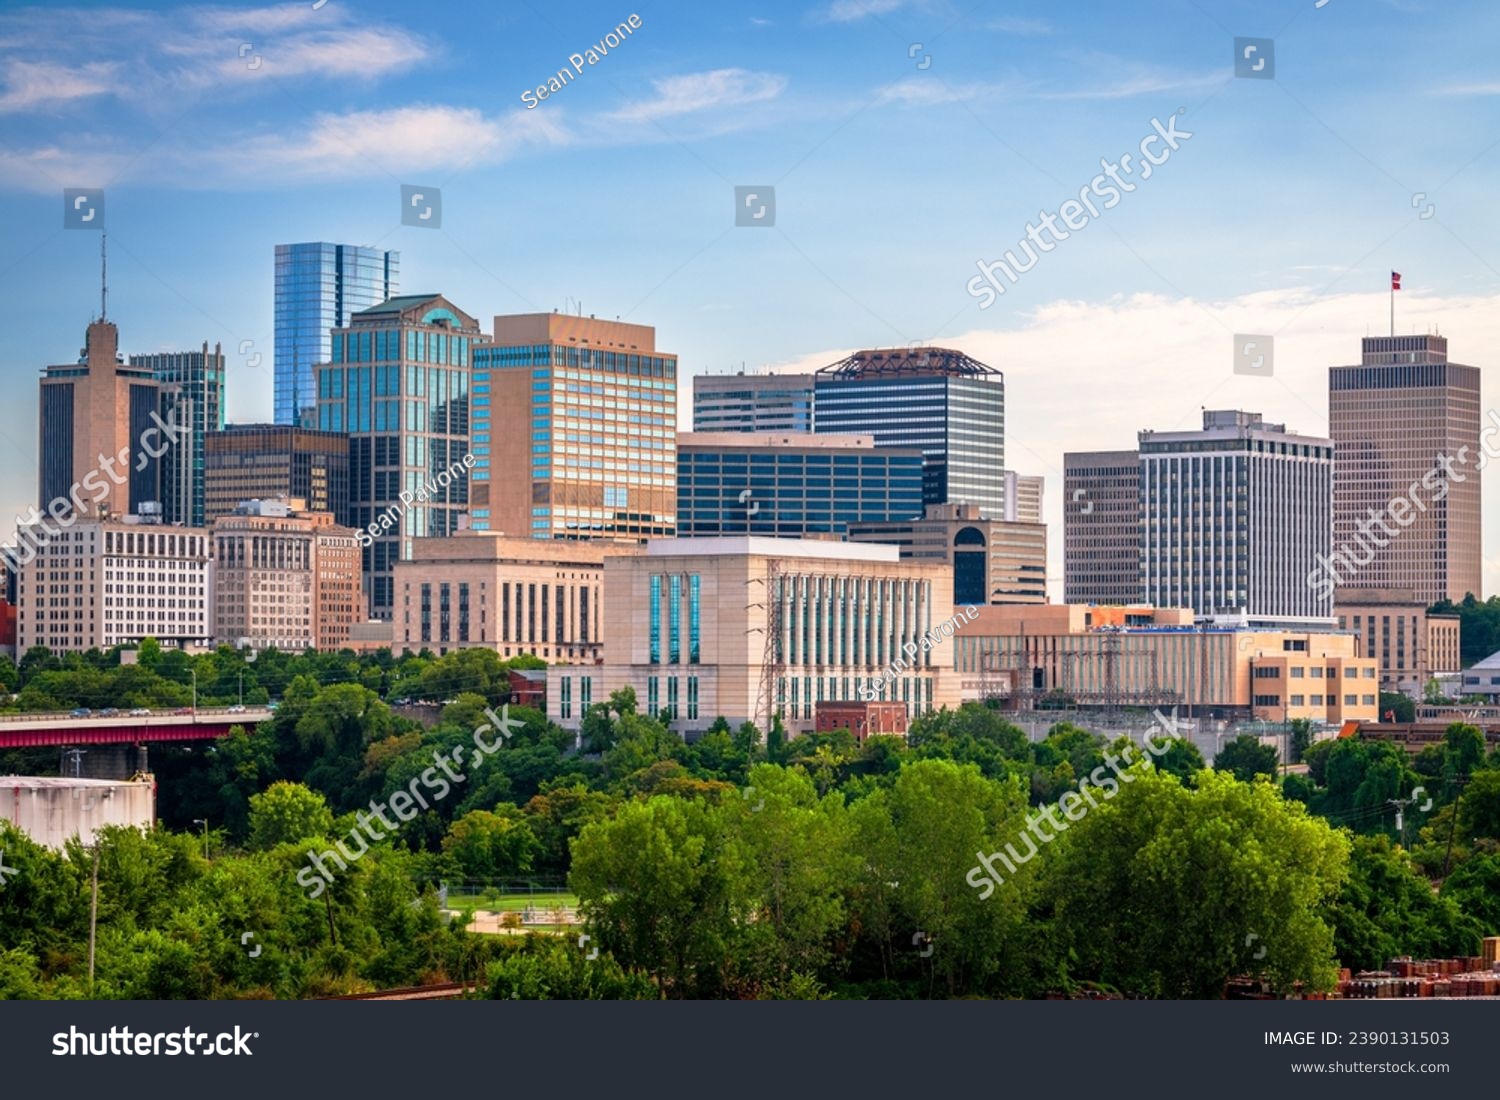 Generic office buildings in downtown Nashville, Tennessee, USA. #2390131503